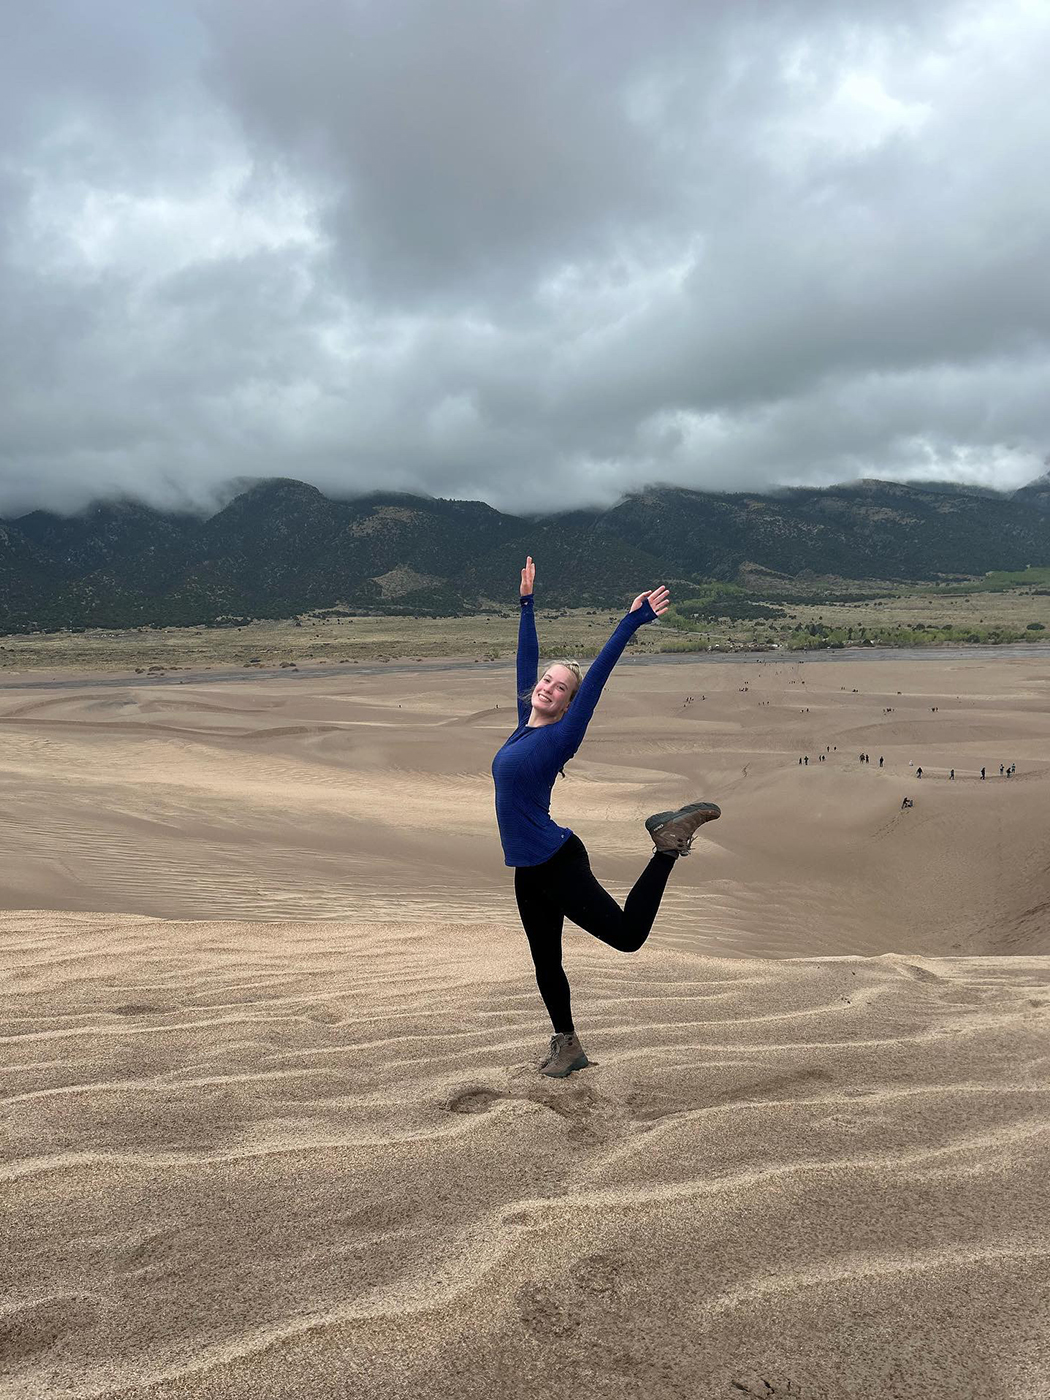 SMU-in-Taos student Ella Collard takes a moment to pose on the desert sand in Taos, New Mexico.